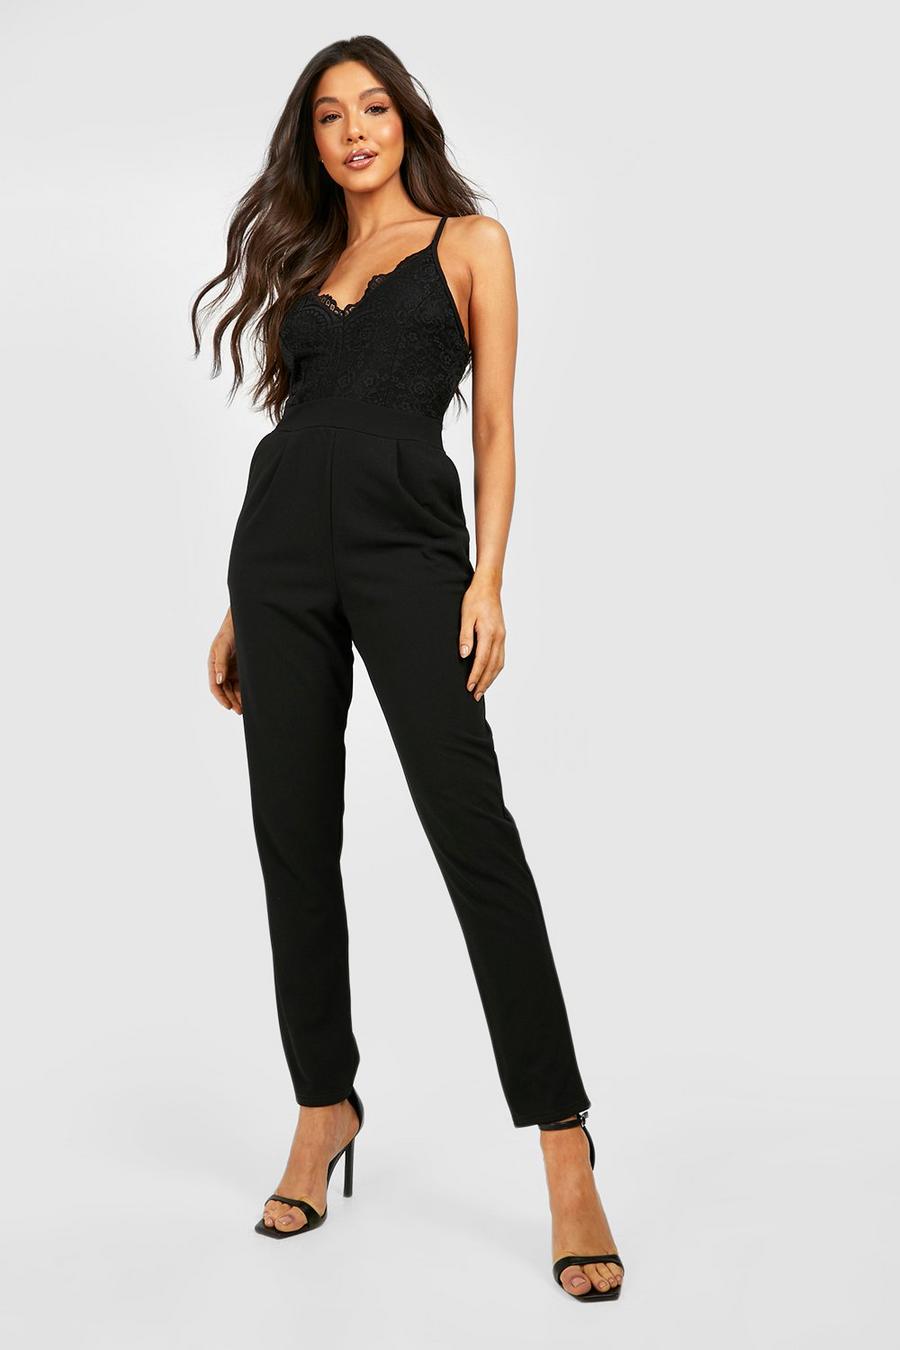 Black Strappy Lace Tapered Leg Jumpsuit